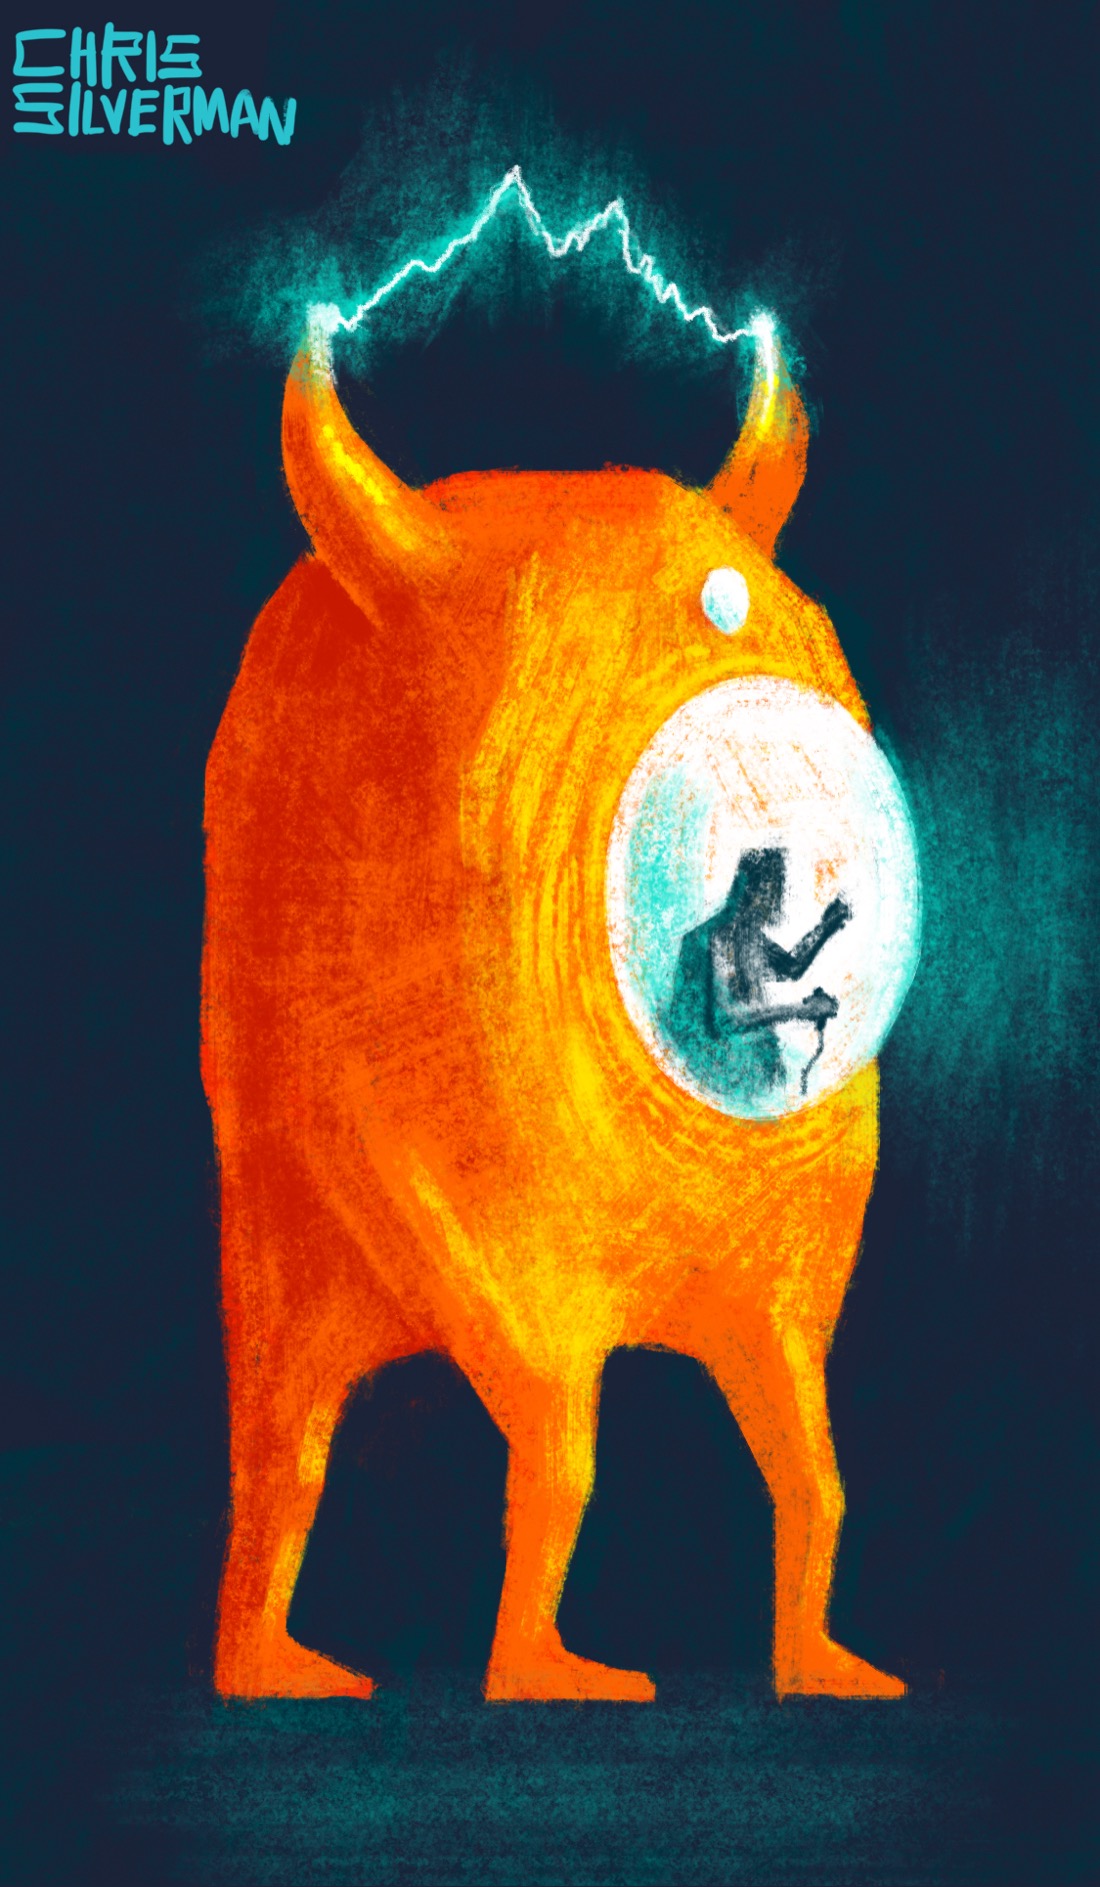 A three-legged orange entity, somewhere between a creature and a machine, with two horns and an enormous eye-like window in the middle of its body. The entity is in a dark area: at night, or maybe even under the water. A person is visible in the window, operating controls. A glowing green bolt of electricity jumps between the entity's horns. The light from the interior casts a hazy green glow out into the darkness.